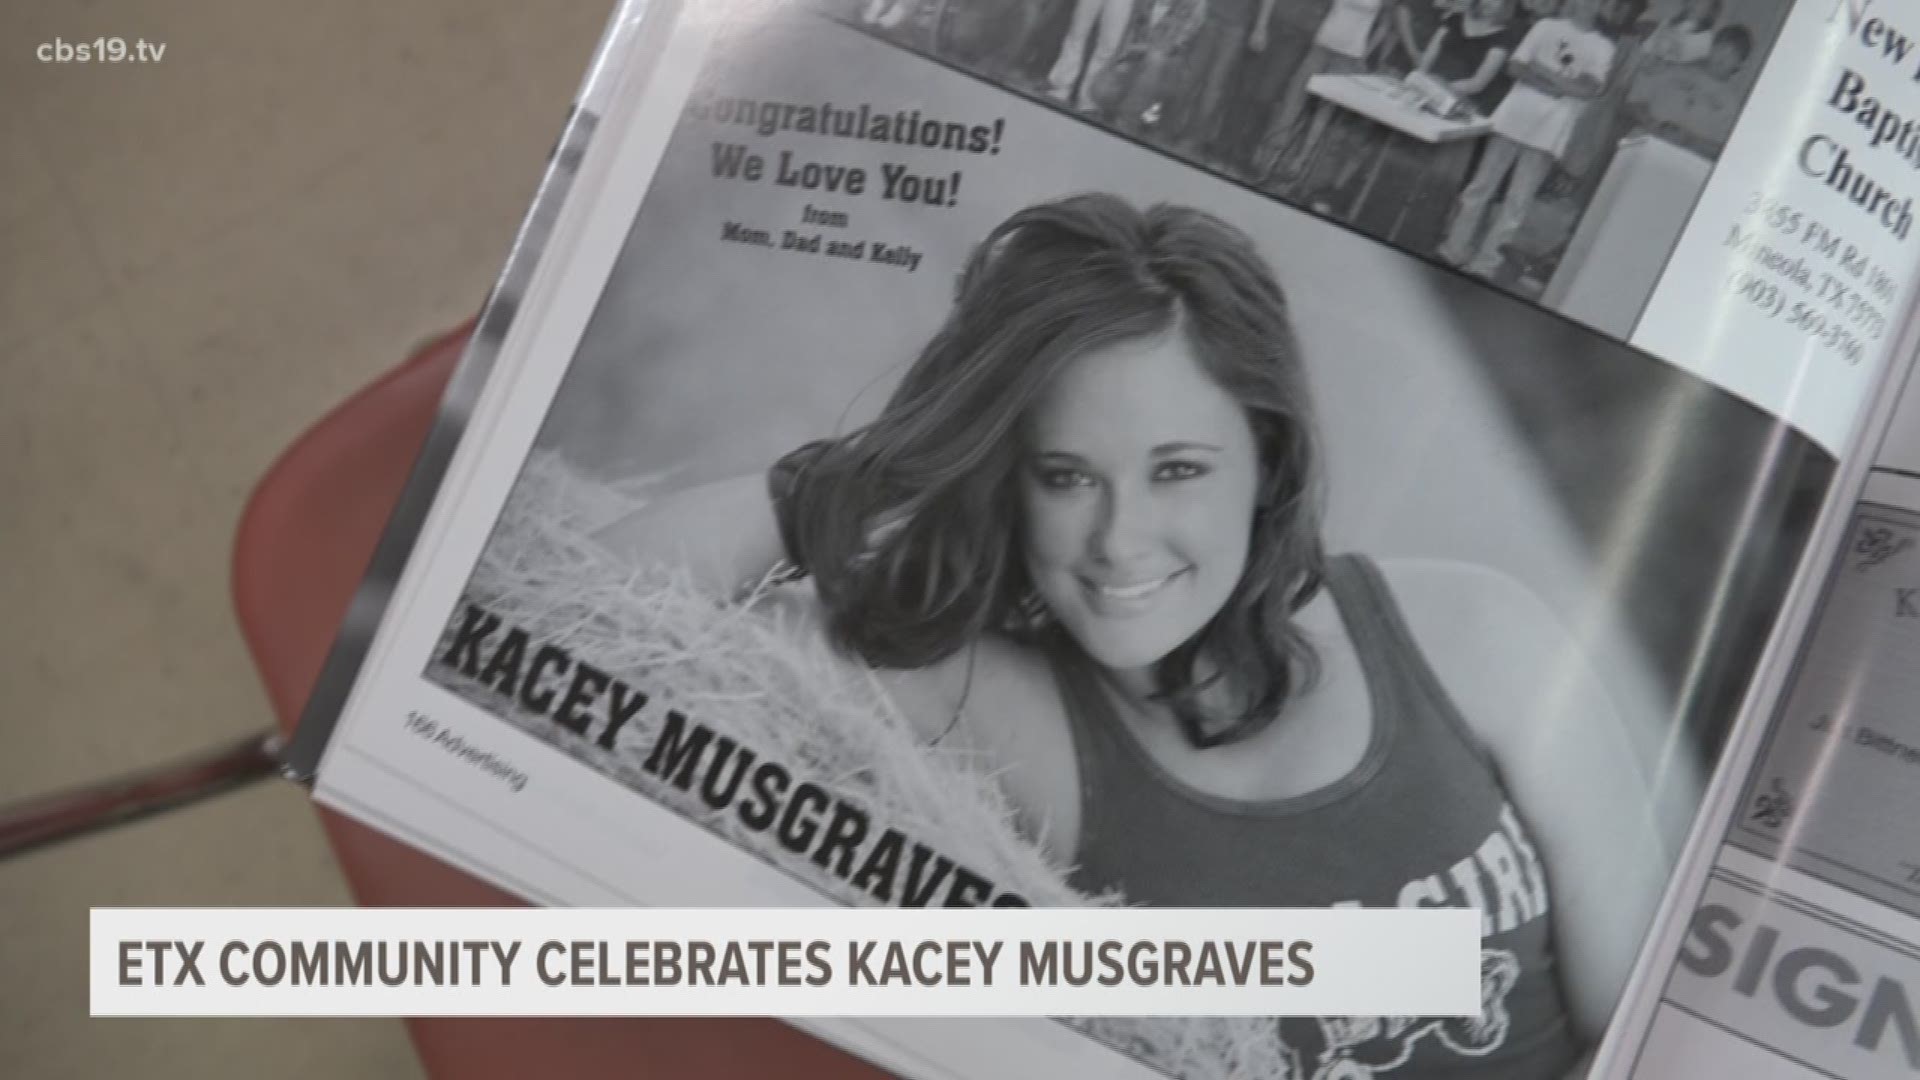 Kacey Musgraves took home 4 Grammy awards Sunday night, including the top prize of the night, Album of the Year. Mineola, where Kacey grew up was buzzing about her win and some of her teachers even spoke about Kacey growing up.